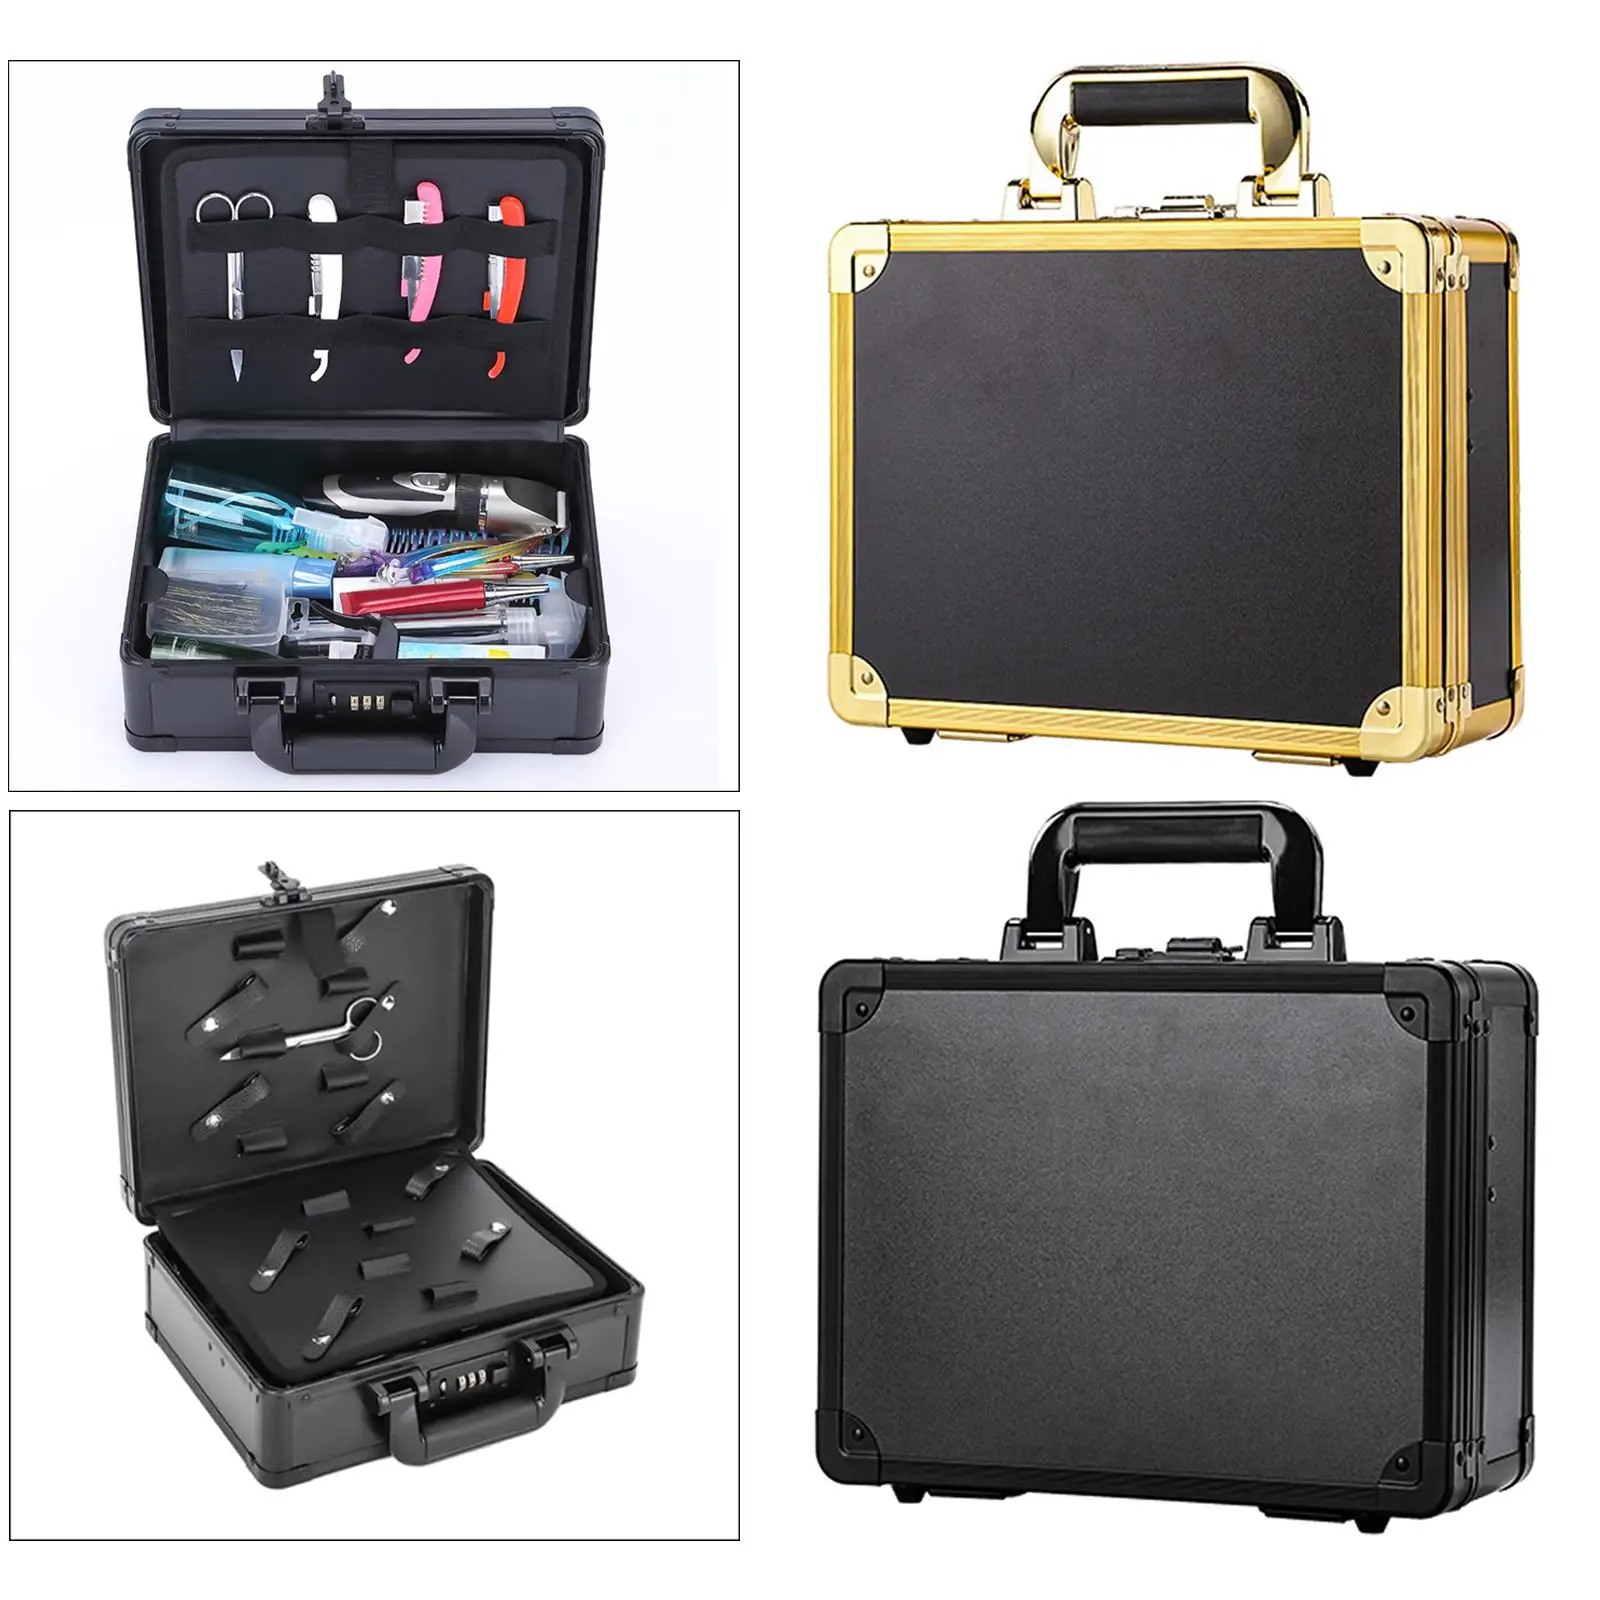 Barber Case with Code Lock Portable  Holds  Travel Bag for Makeup Hair Scissors Carrying Salon Key